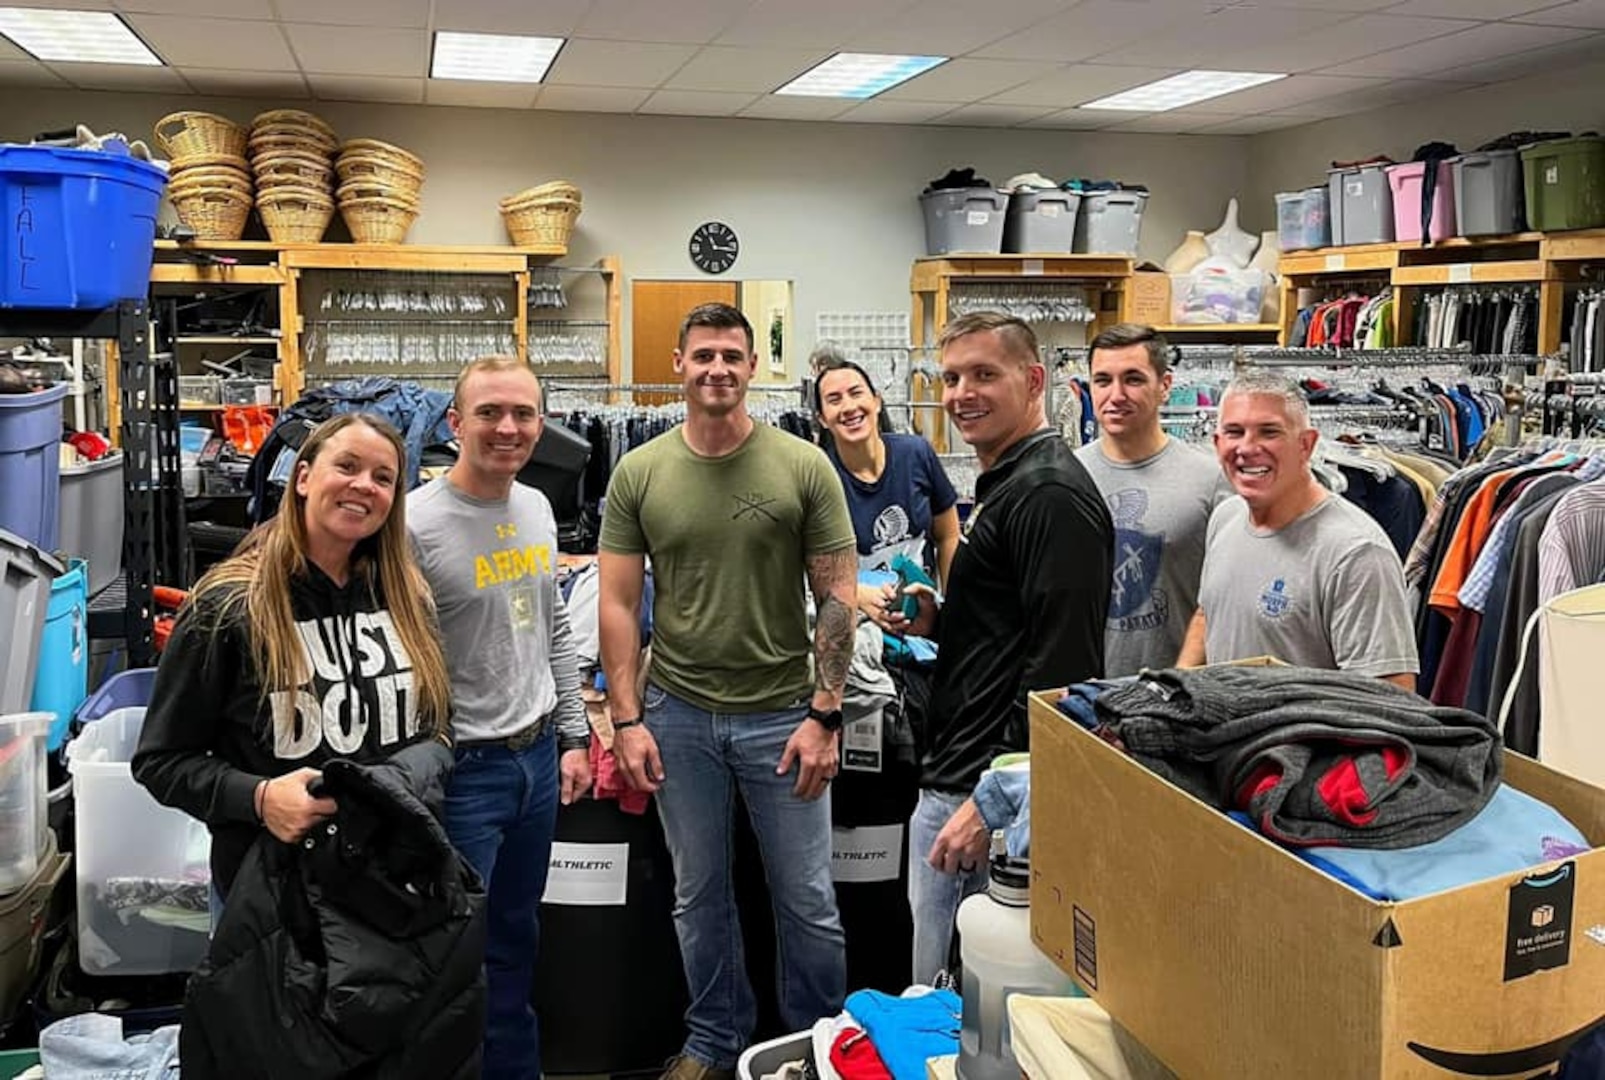 Members of the 1st Battalion, 179th Infantry Regiment, 45th Infantry Brigade Combat Team, pose for a photo while volunteering at a local charity in Edmond, Oklahoma. (Photo provided by 1st Battalion, 179th Infantry Regiment)